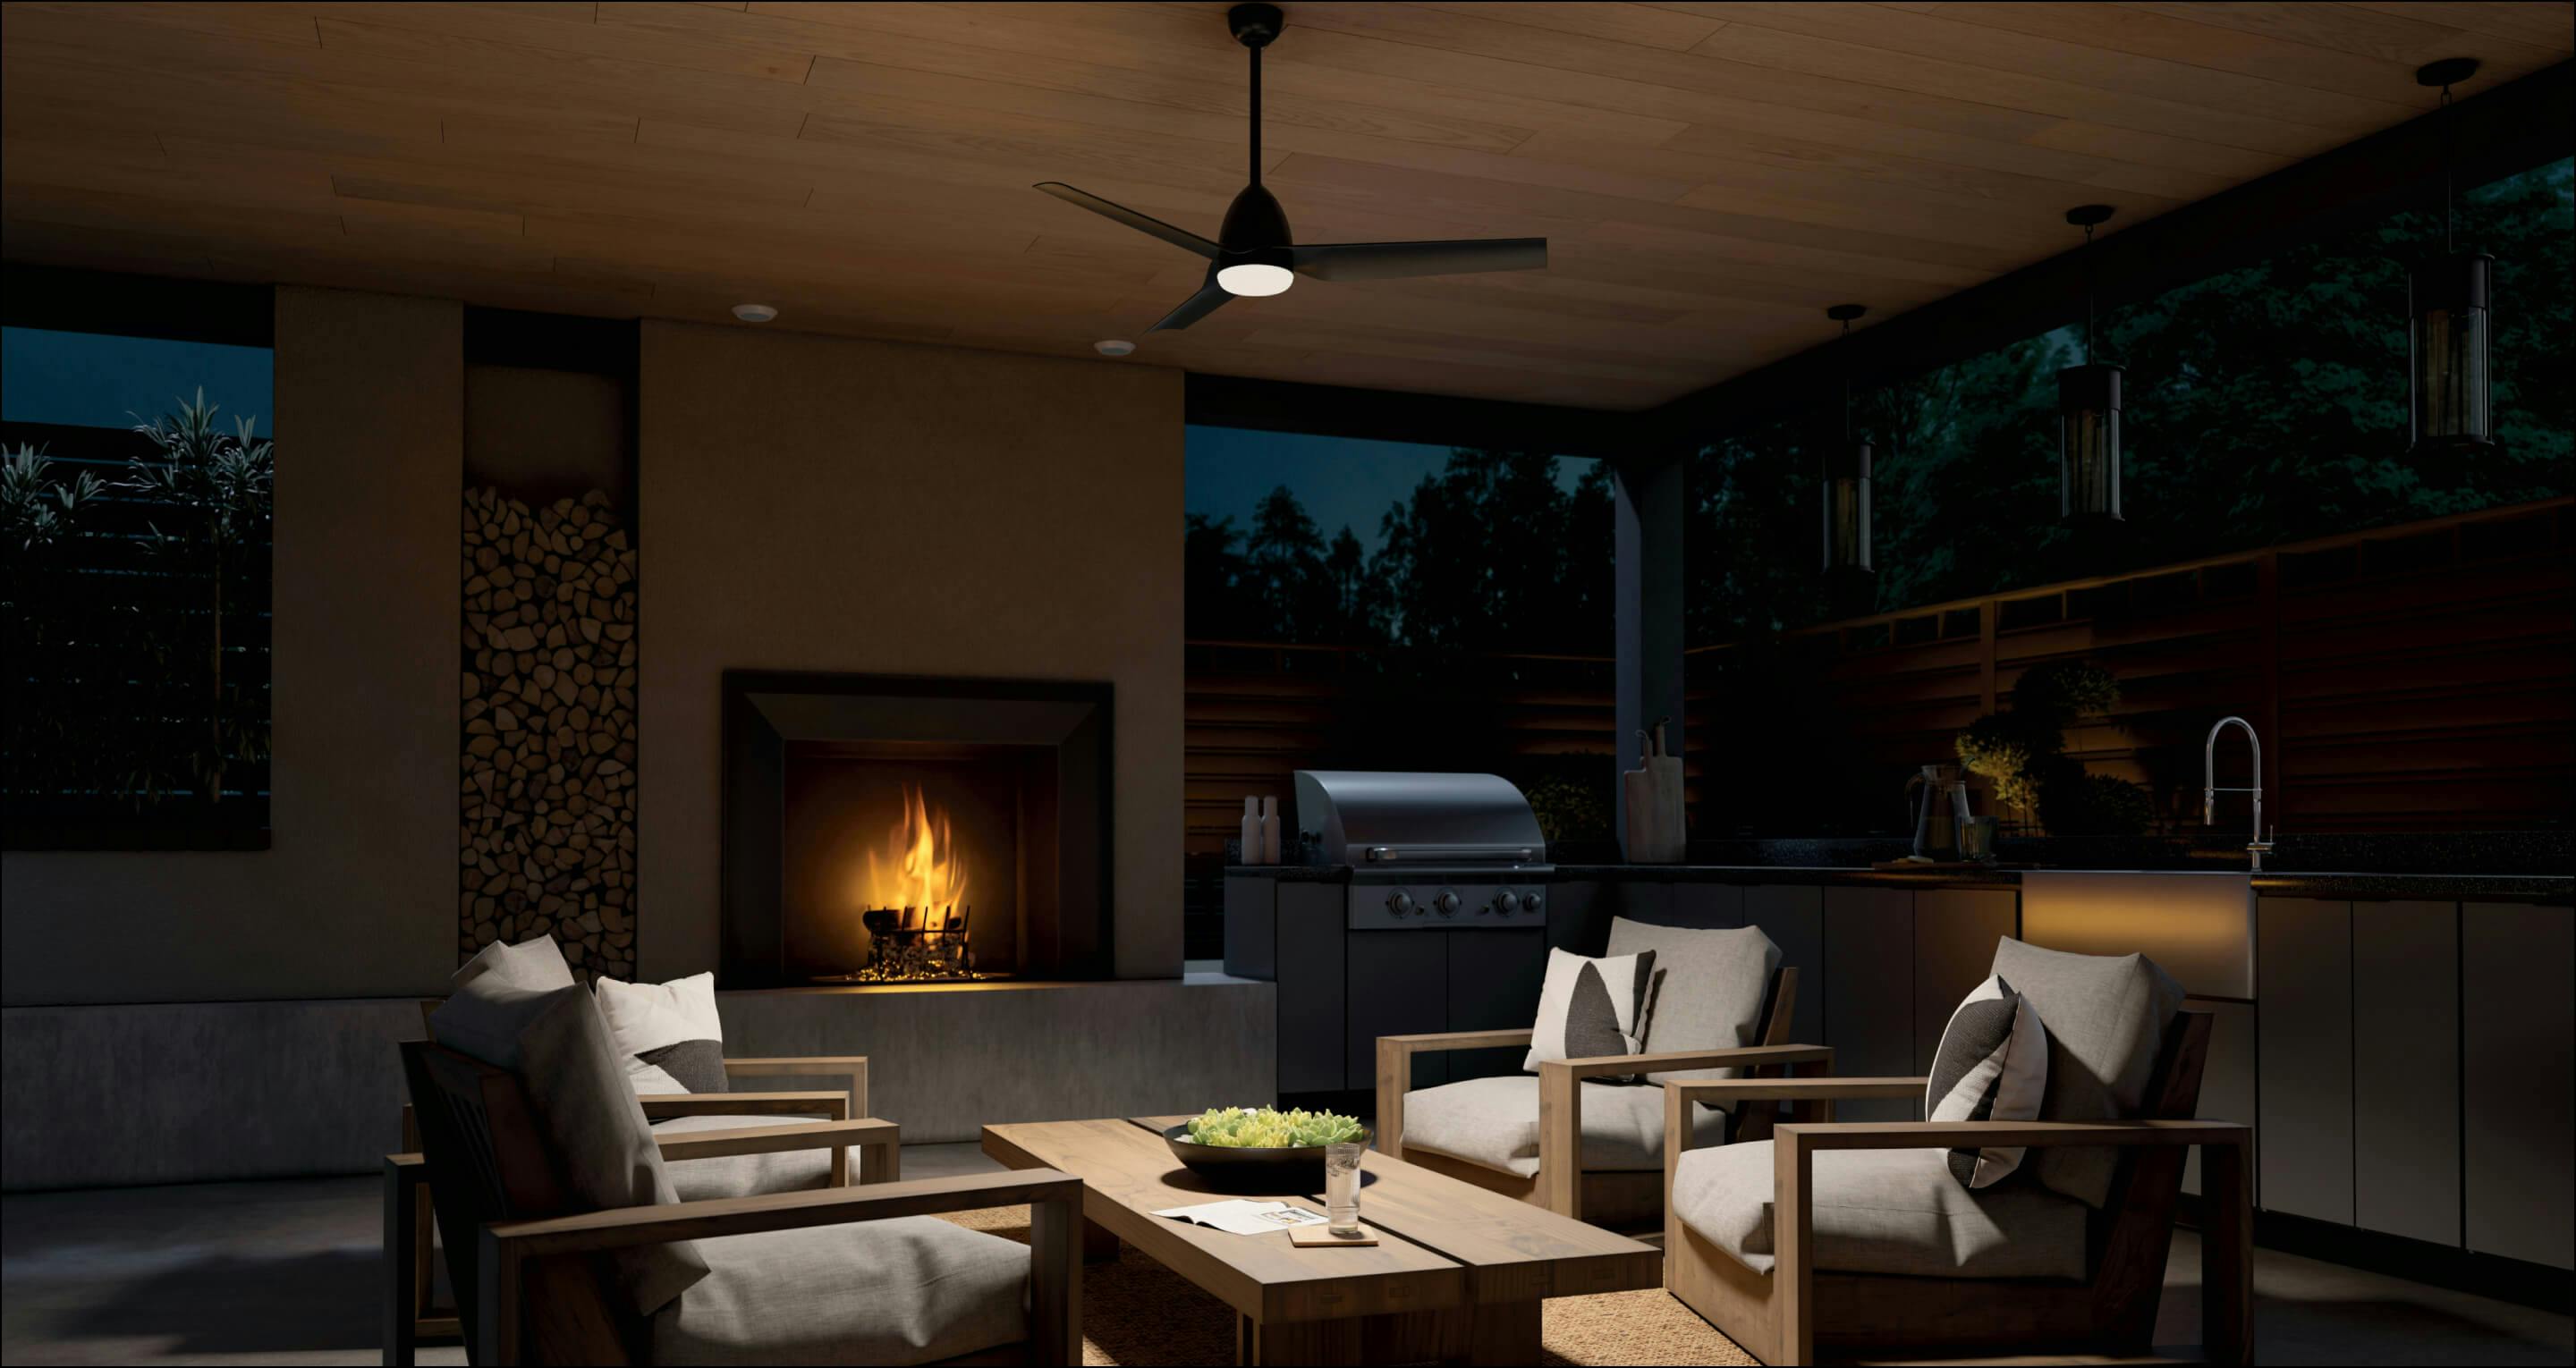 Outdoor kitchen at night lit only by a Fit ceiling fan in the center of the room and the fireplace